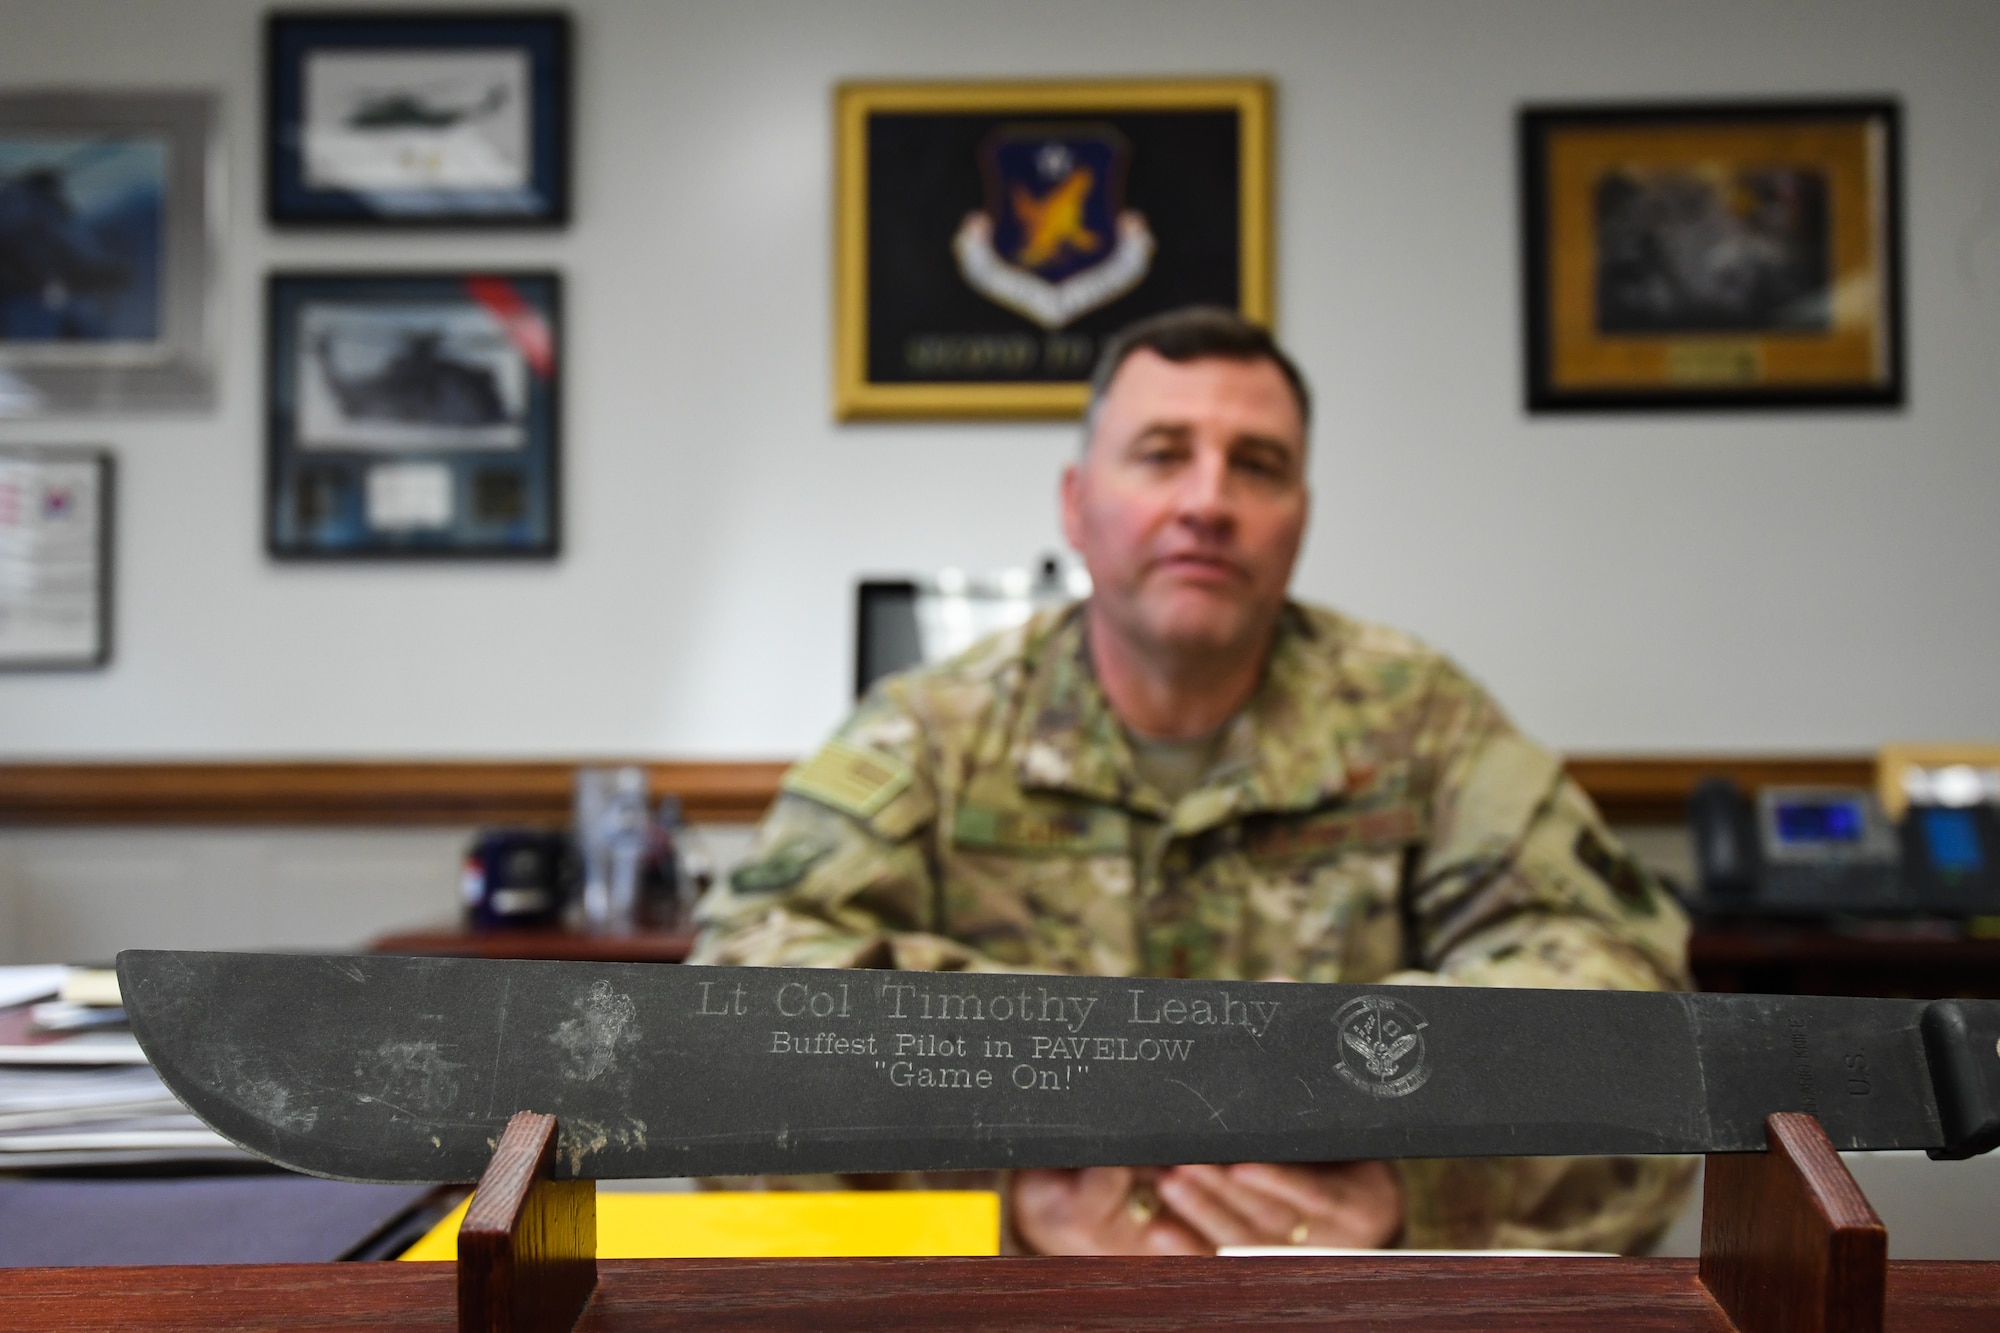 U.S. Air Force Maj. Gen. Timothy Leahy, Second Air Force commander, poses for a photo at his desk on Keesler Air Force Base, Mississippi, Aug. 14, 2019. Leahy will retire on Dec. 1 with more than 34 years of military service. Throughout his career, Leahy held positions at the major command, sub-unified combatant command and geographic and functional combatant command levels. He also commanded at the squadron, wing, center and numbered Air Force level. Additionally, Leahy is a command pilot with more than 3,200 hours of flight time, primarily in Special Operations Forces aircraft. (U.S. Air Force photo by Airman 1st Class Spencer Tobler)